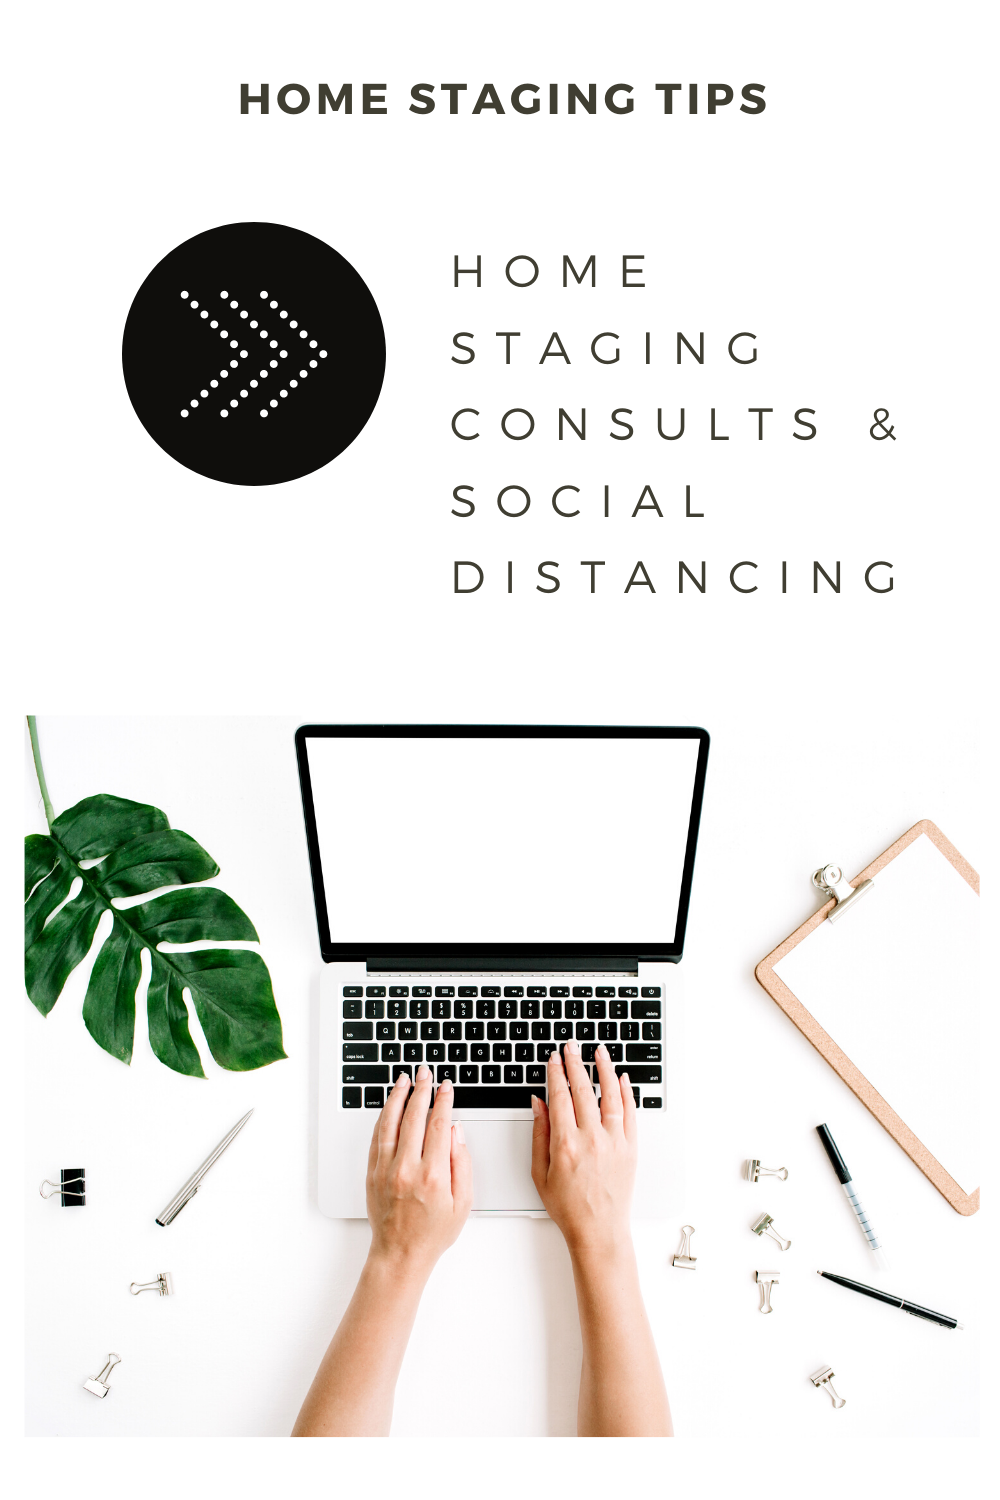 home staging consults while social distancing